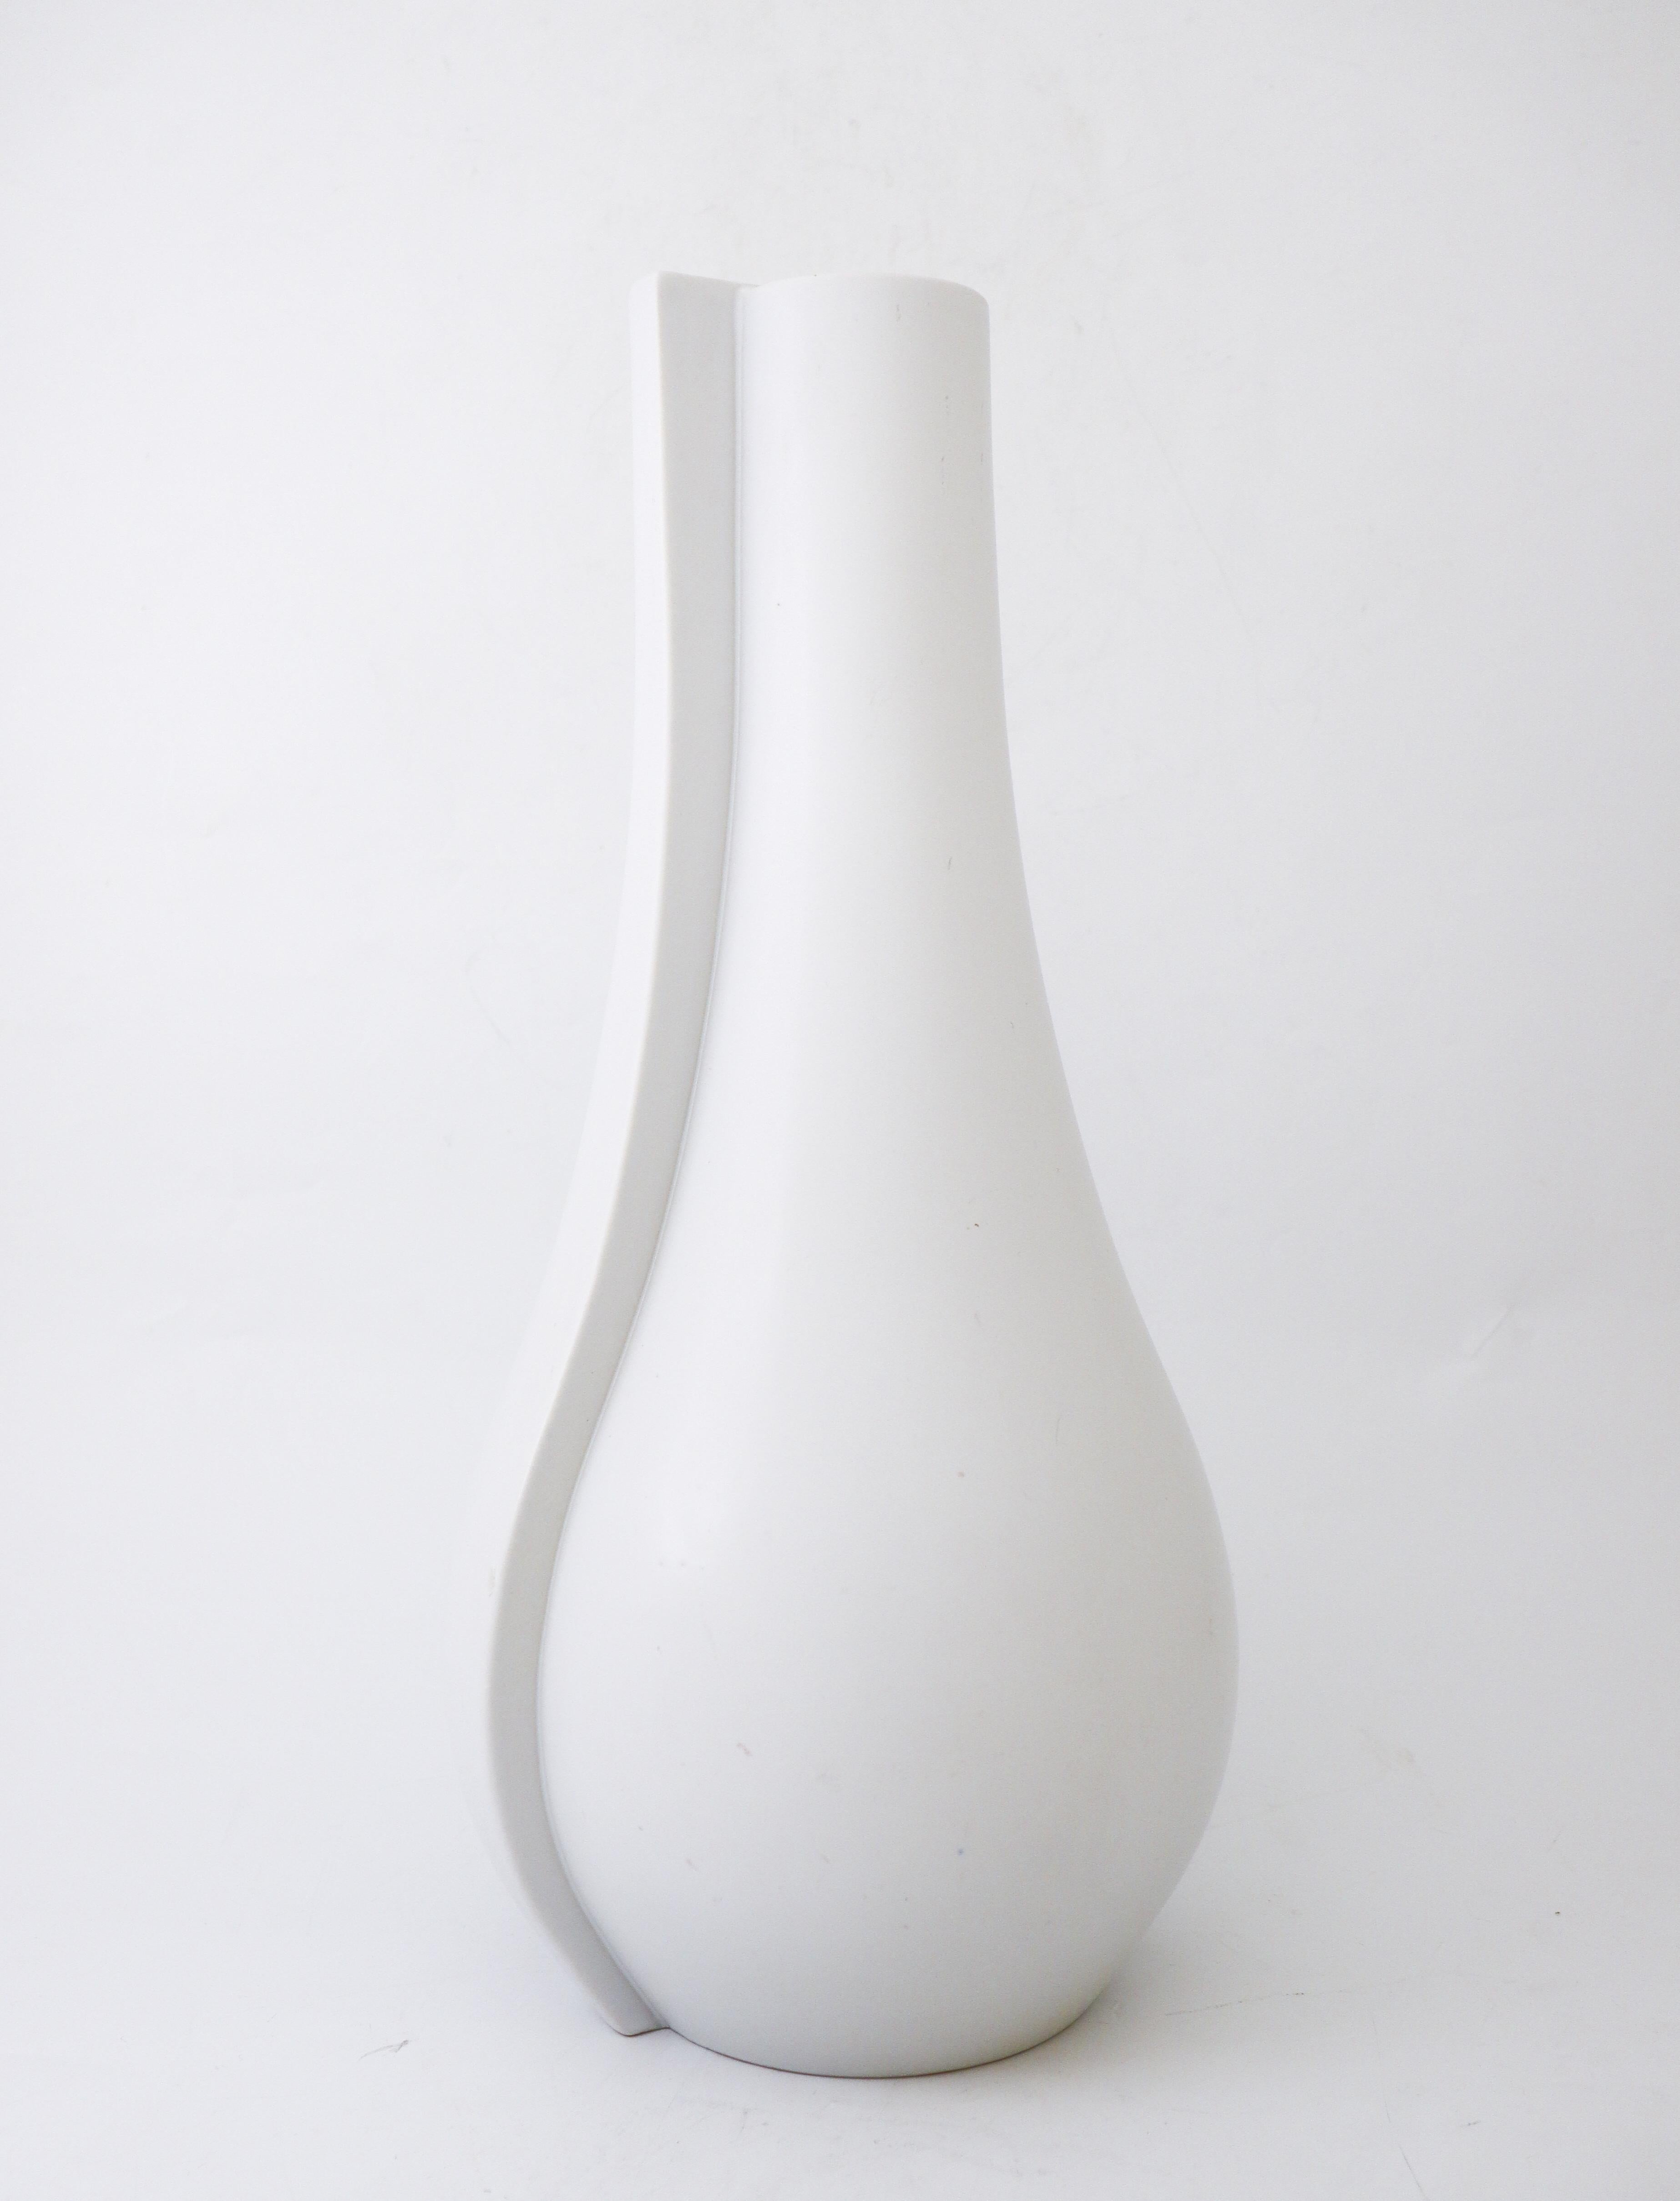 A lovely, large vase of model Surrea designed by Wilhelm Kåge at Gustavsberg in the 1940s. It is 45.5 cm high and in very good condition except from some minor marks in the glaze and some minor scratches. This is one of the most well known and